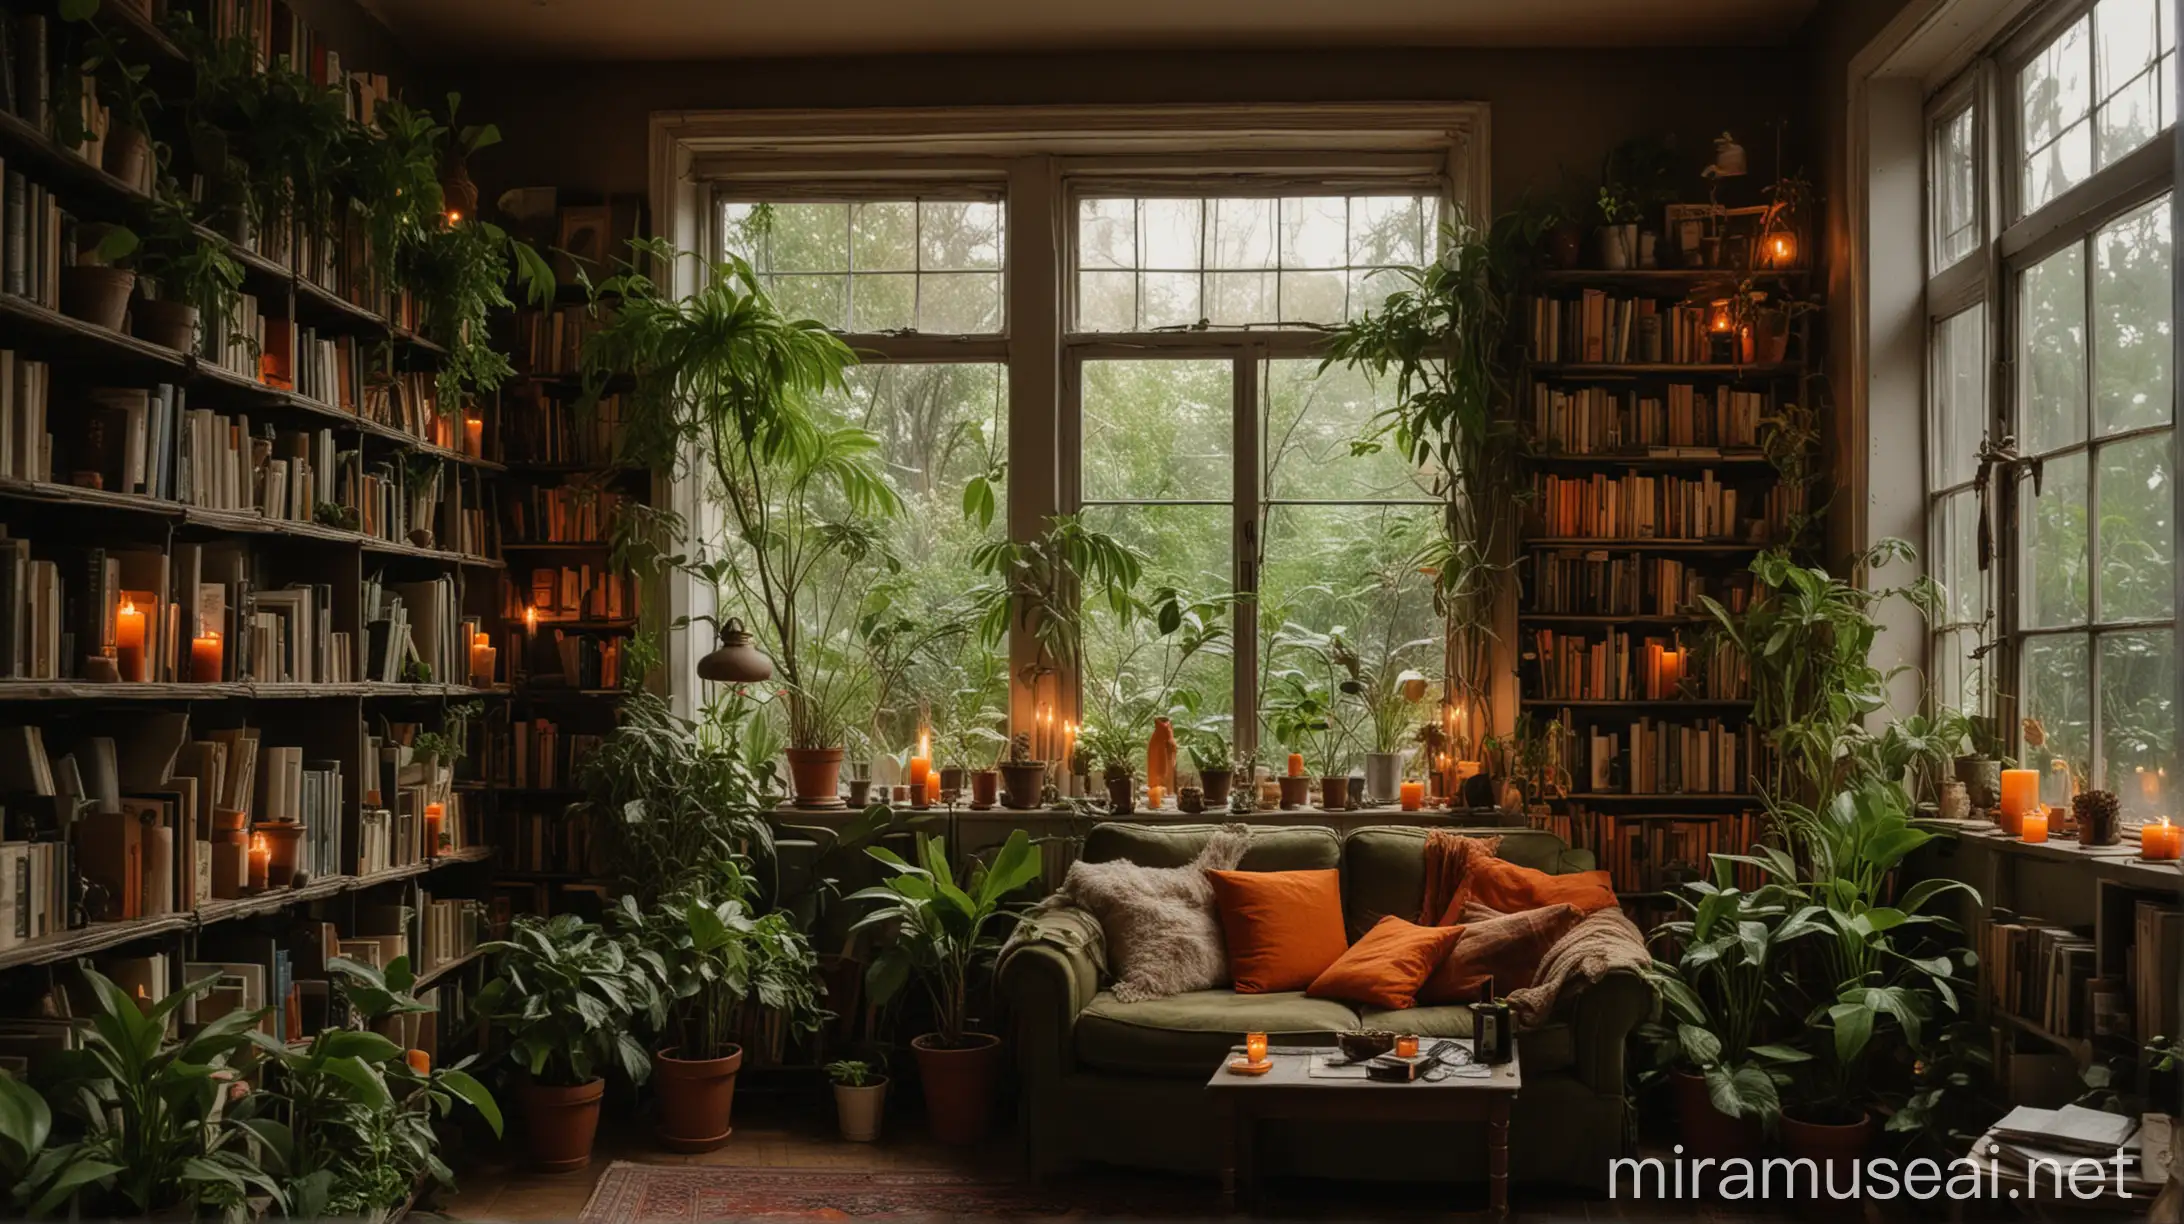 Vintage Library Ambiance with Lush Greenery and Warm Candlelight